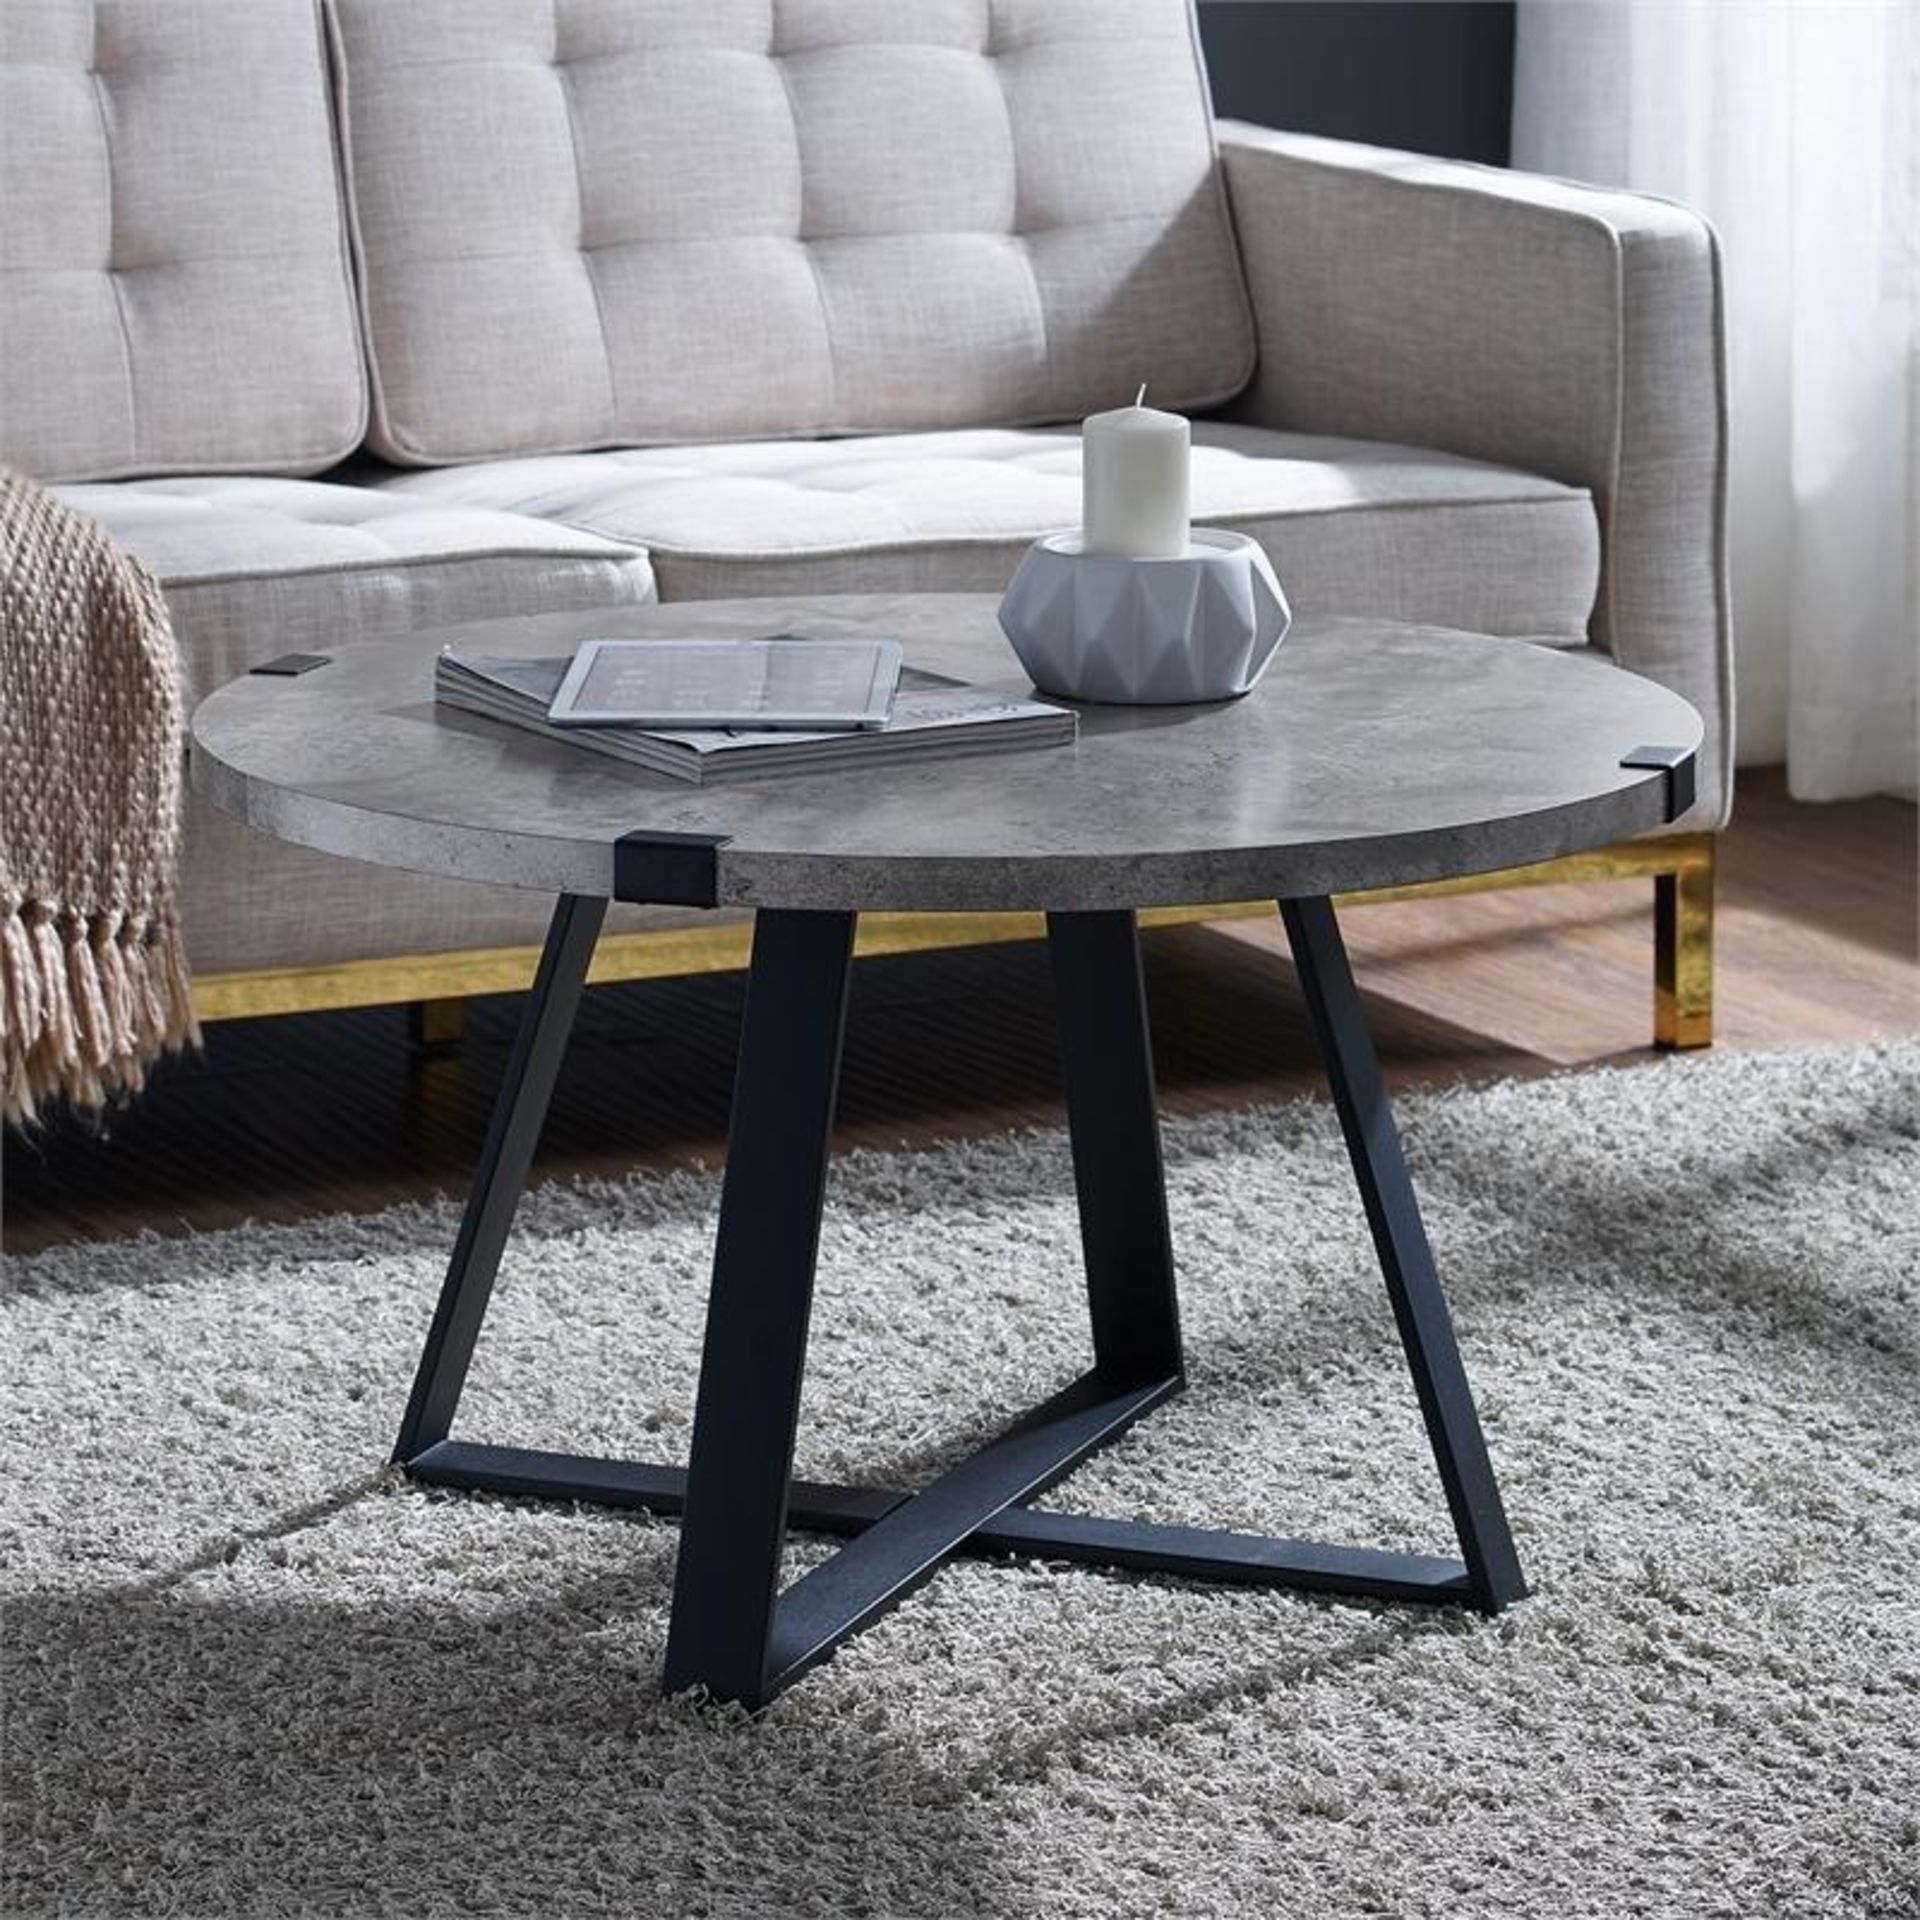 IRVINE DARK CONCRETE EFFECT COFFEE TABLE WITH BLACK FRAME (GREY) - RRP £245